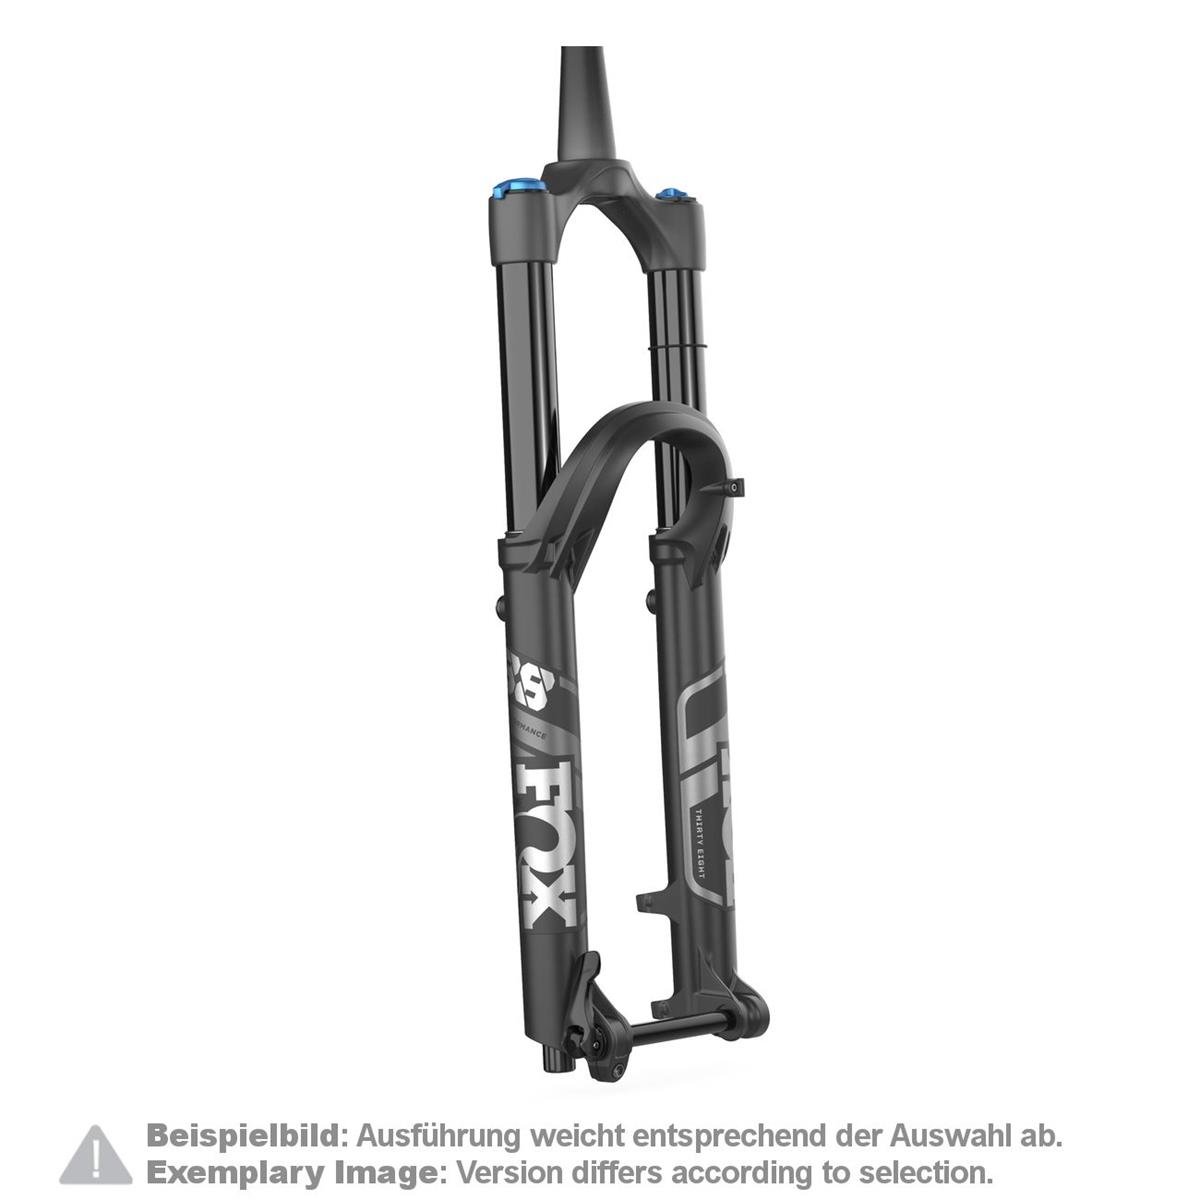 Fox Racing Shox Forcella 38 Float Performance 27.5 Pollici, 15x110 mm, GRIP, 44 mm Offset, 170 mm